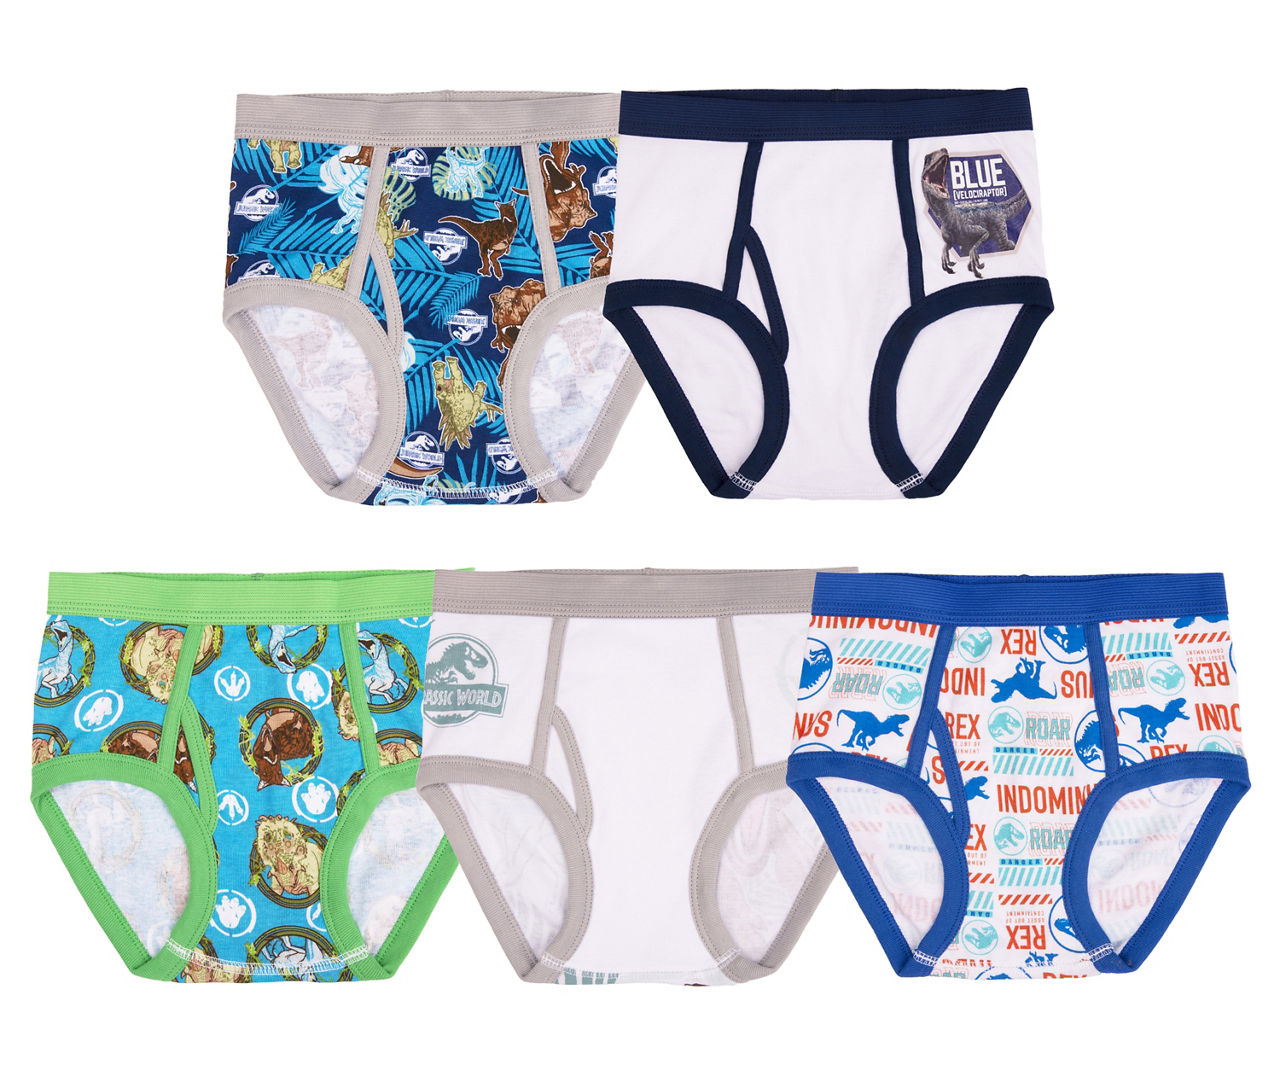 Kids' Size 8 White, Blue & Gray Briefs With Coloring Page, 5-Pack